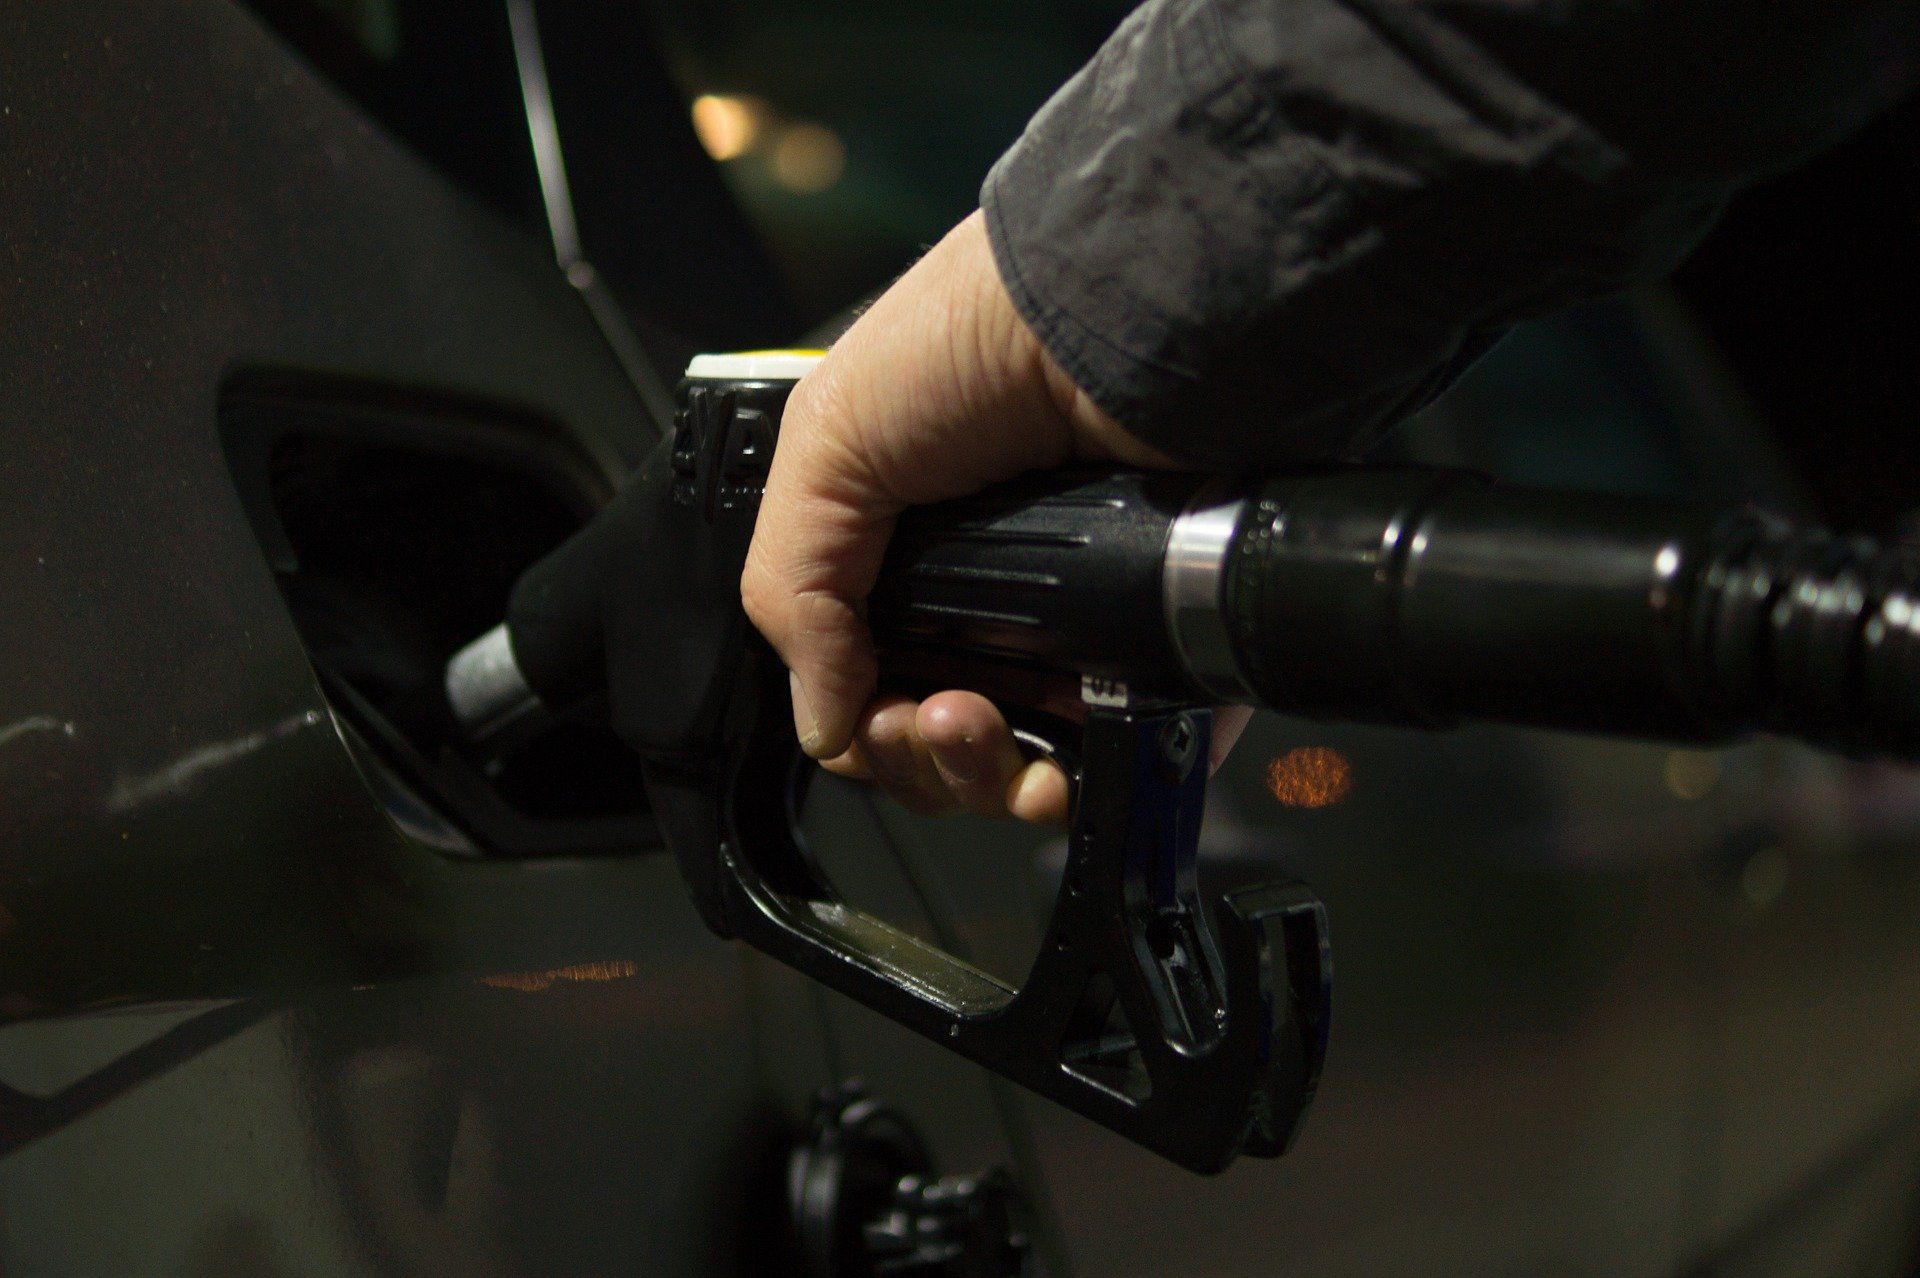 Fuel prices: Petrol priced at Rs 100.21, diesel Rs 91.47 in Delhi on March 29, 2022